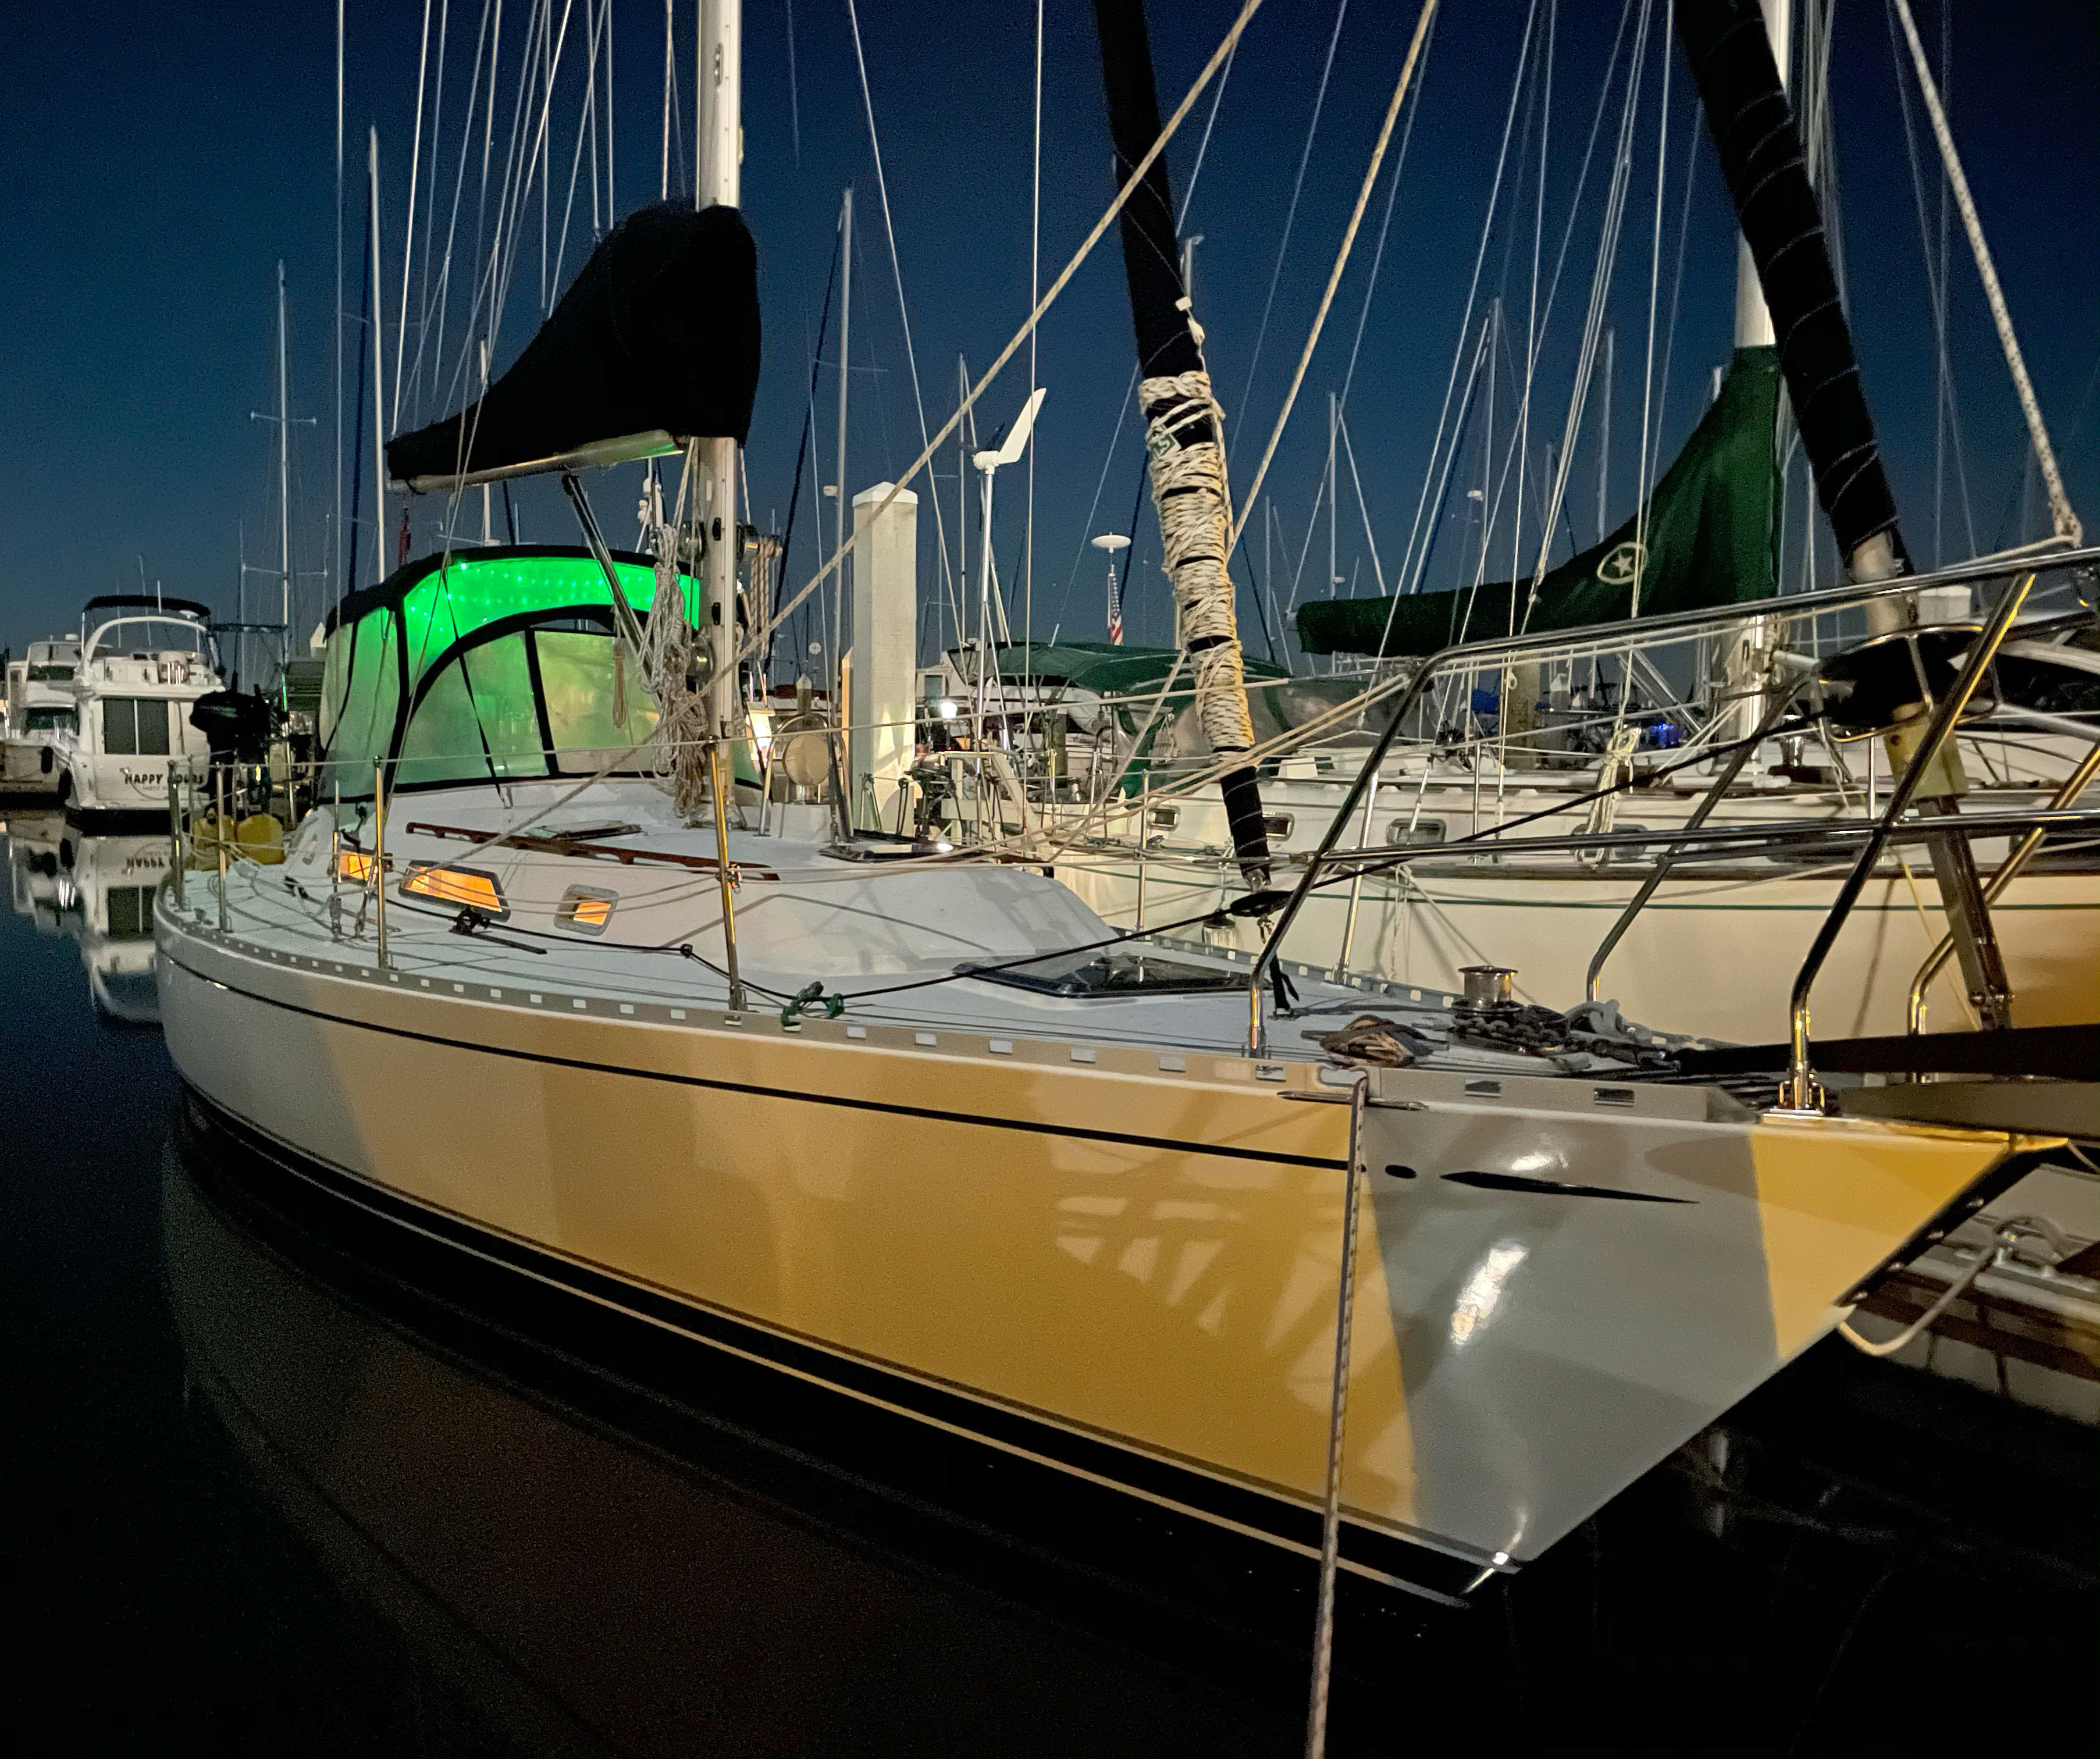 Hylas Yachts Partners With North Sails